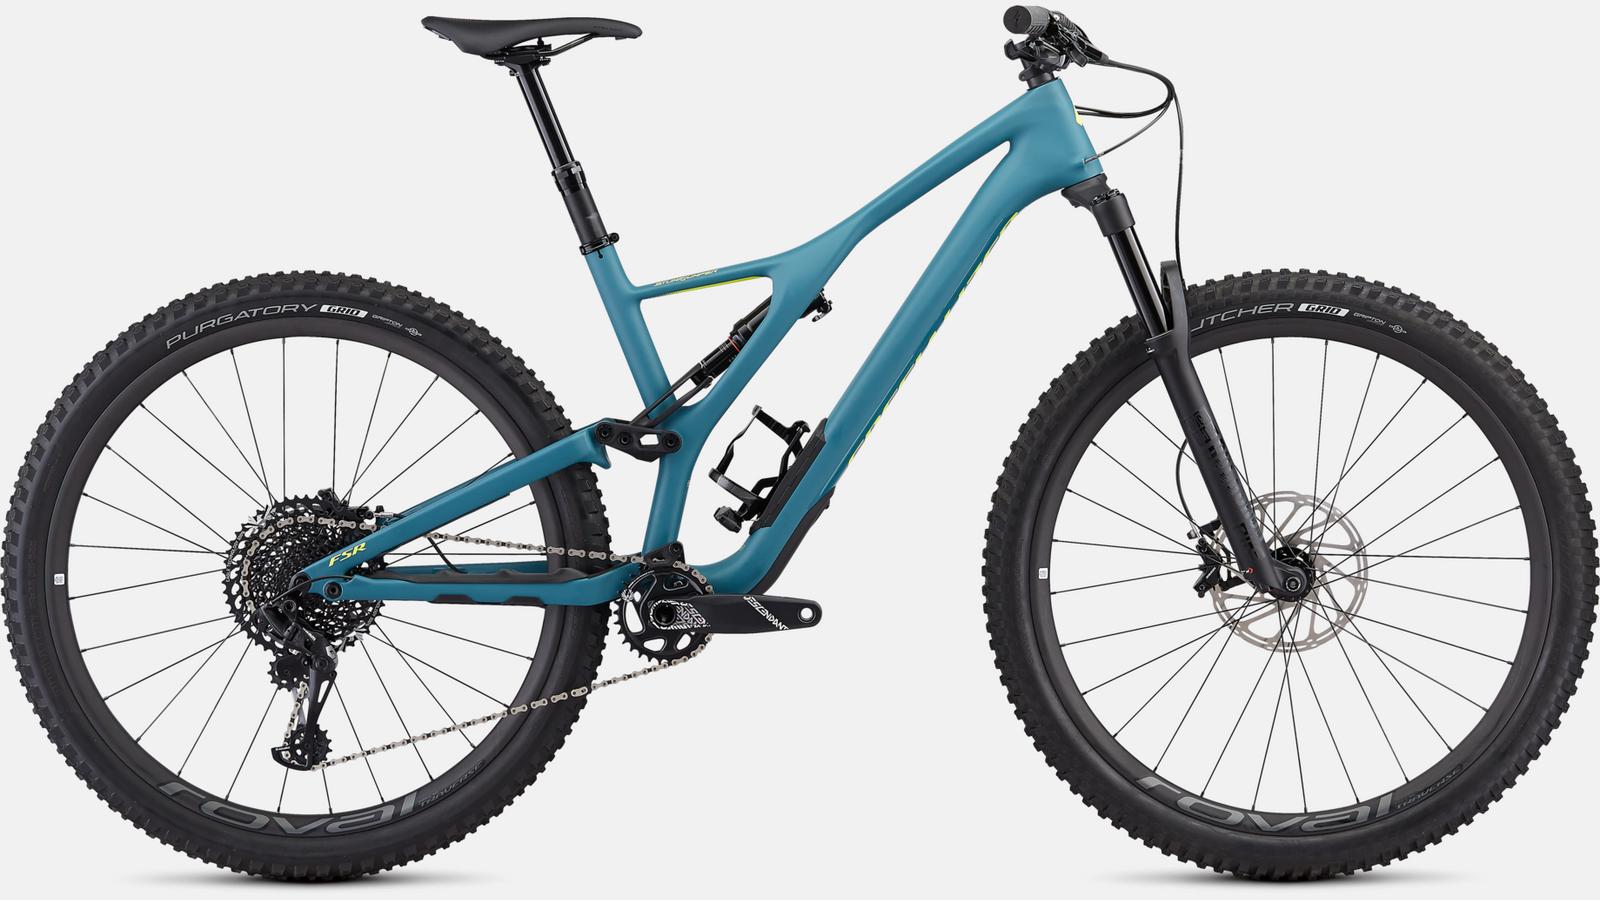 Paint for 2019 Specialized Men's Stumpjumper ST Expert 29 - Satin Dusty Turquoise